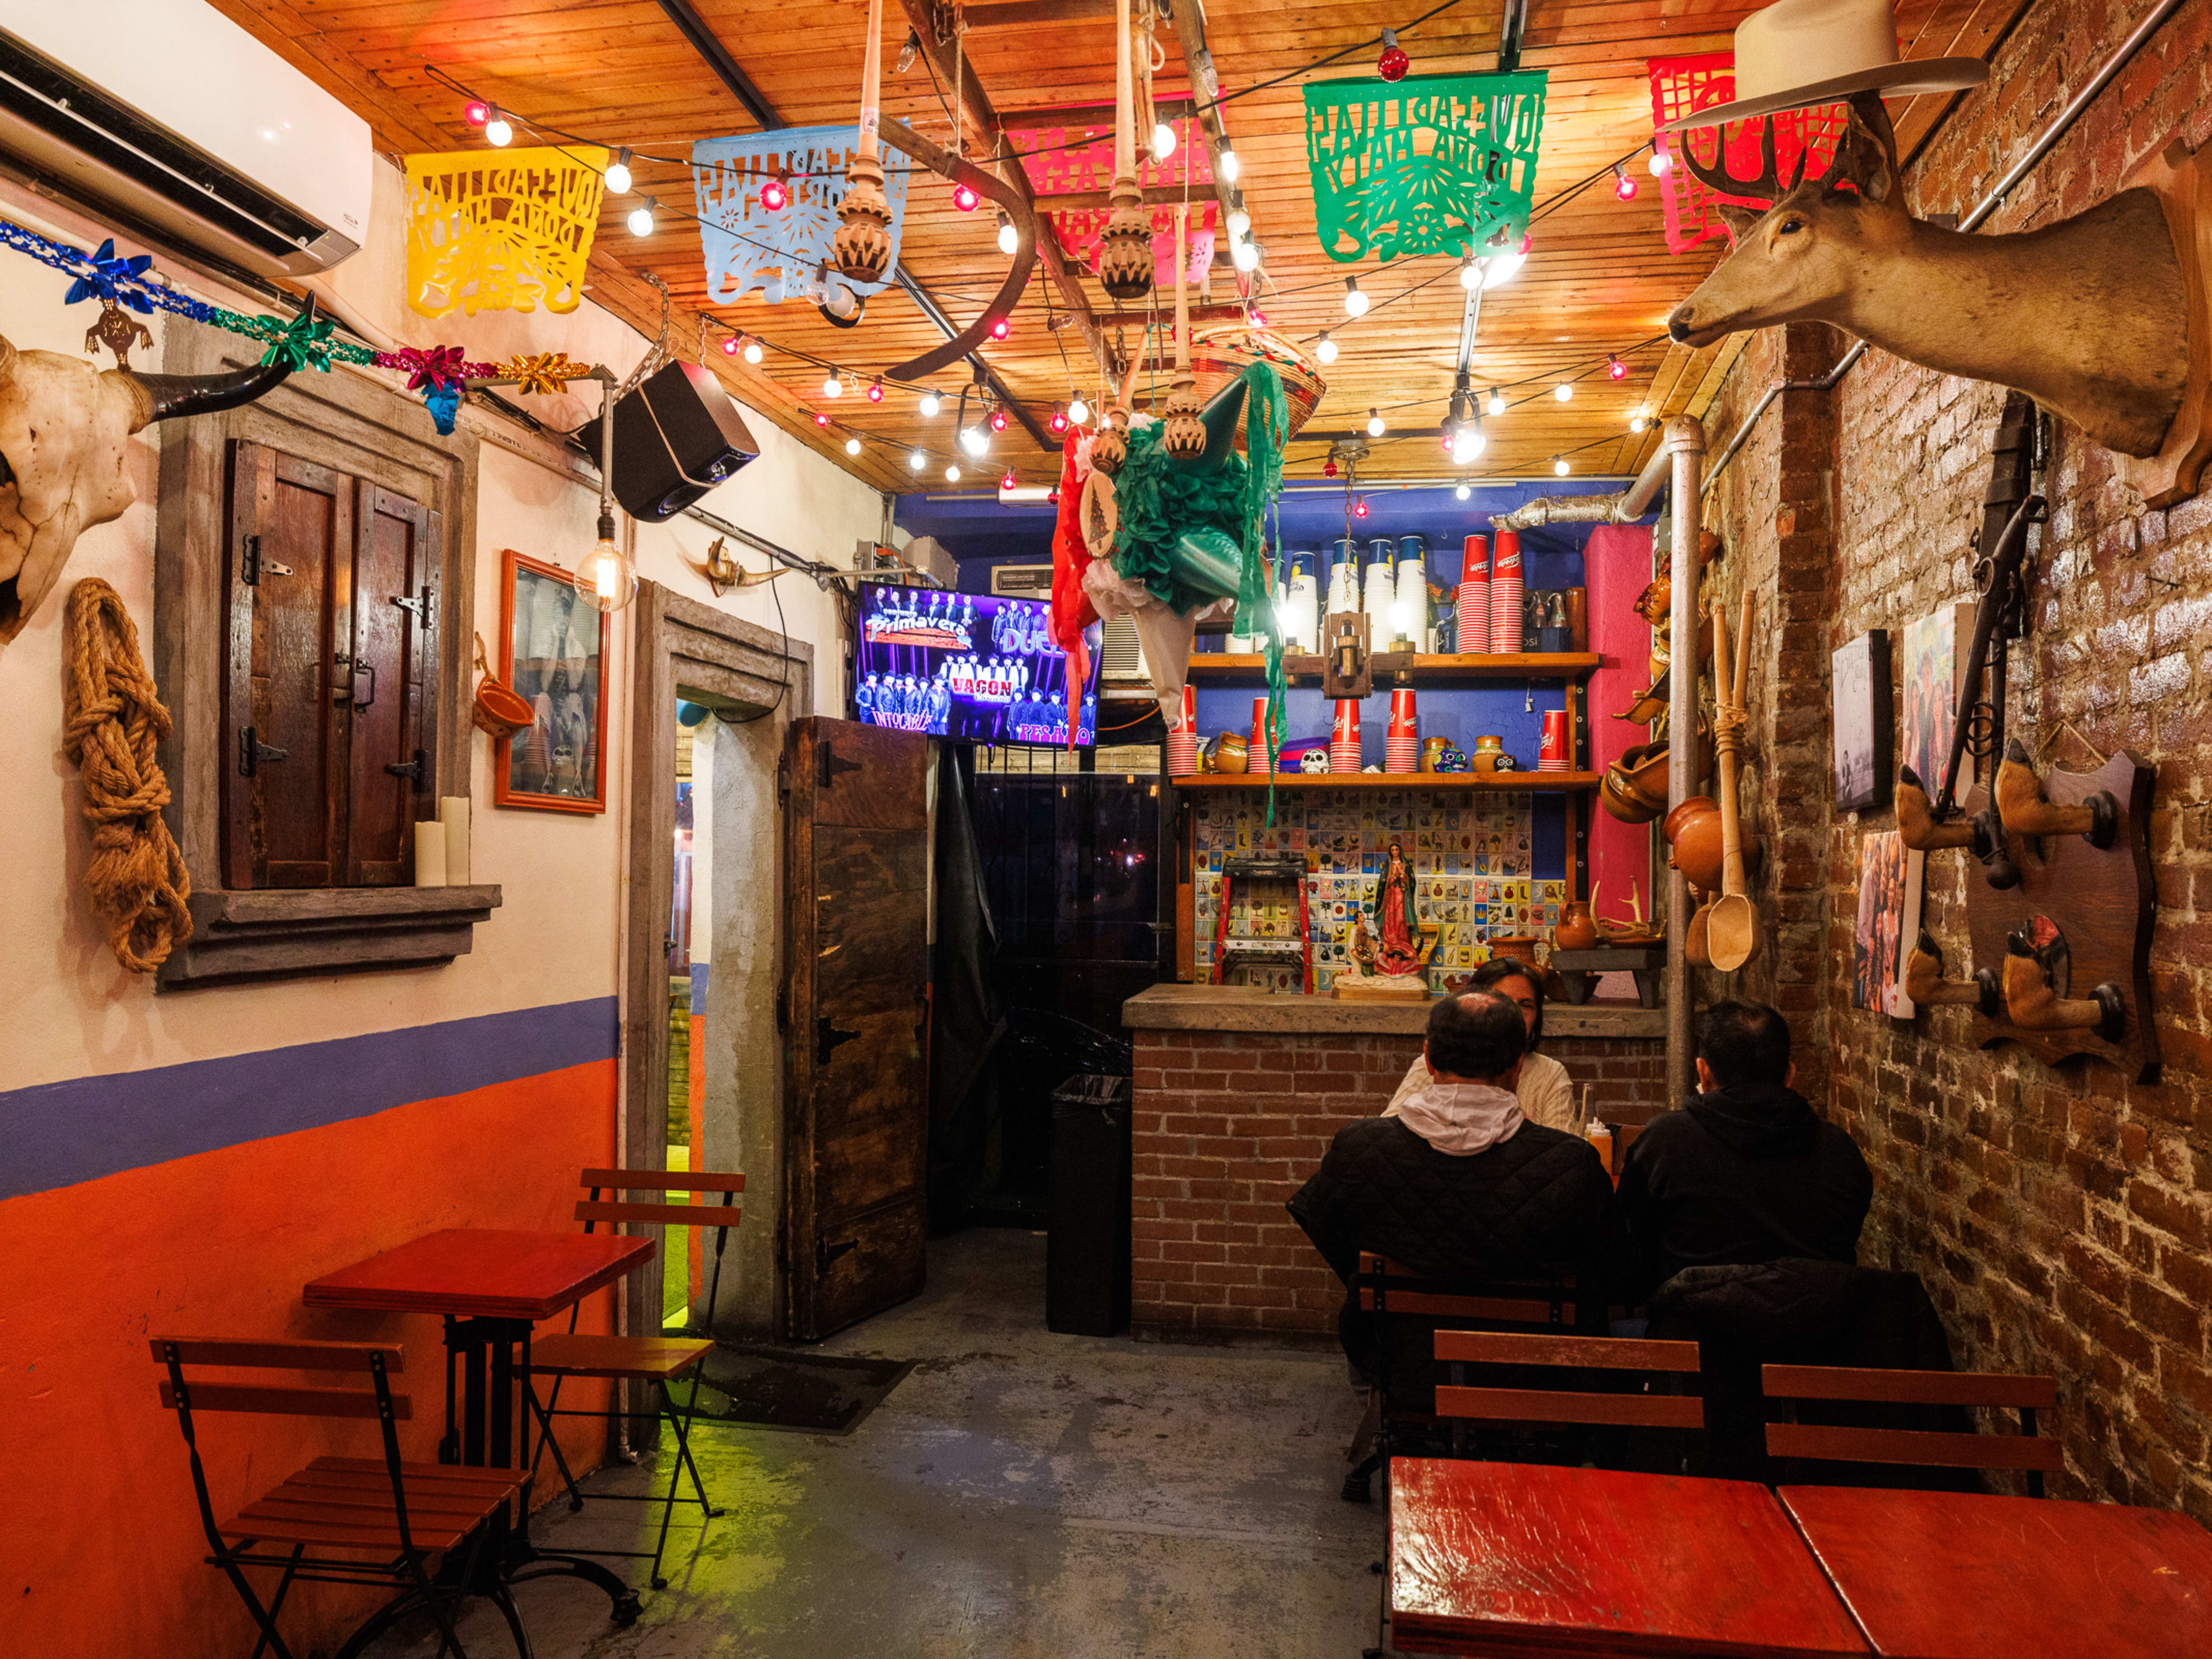 The interior of Quesadillas Doña Maty with people sitting at a table.